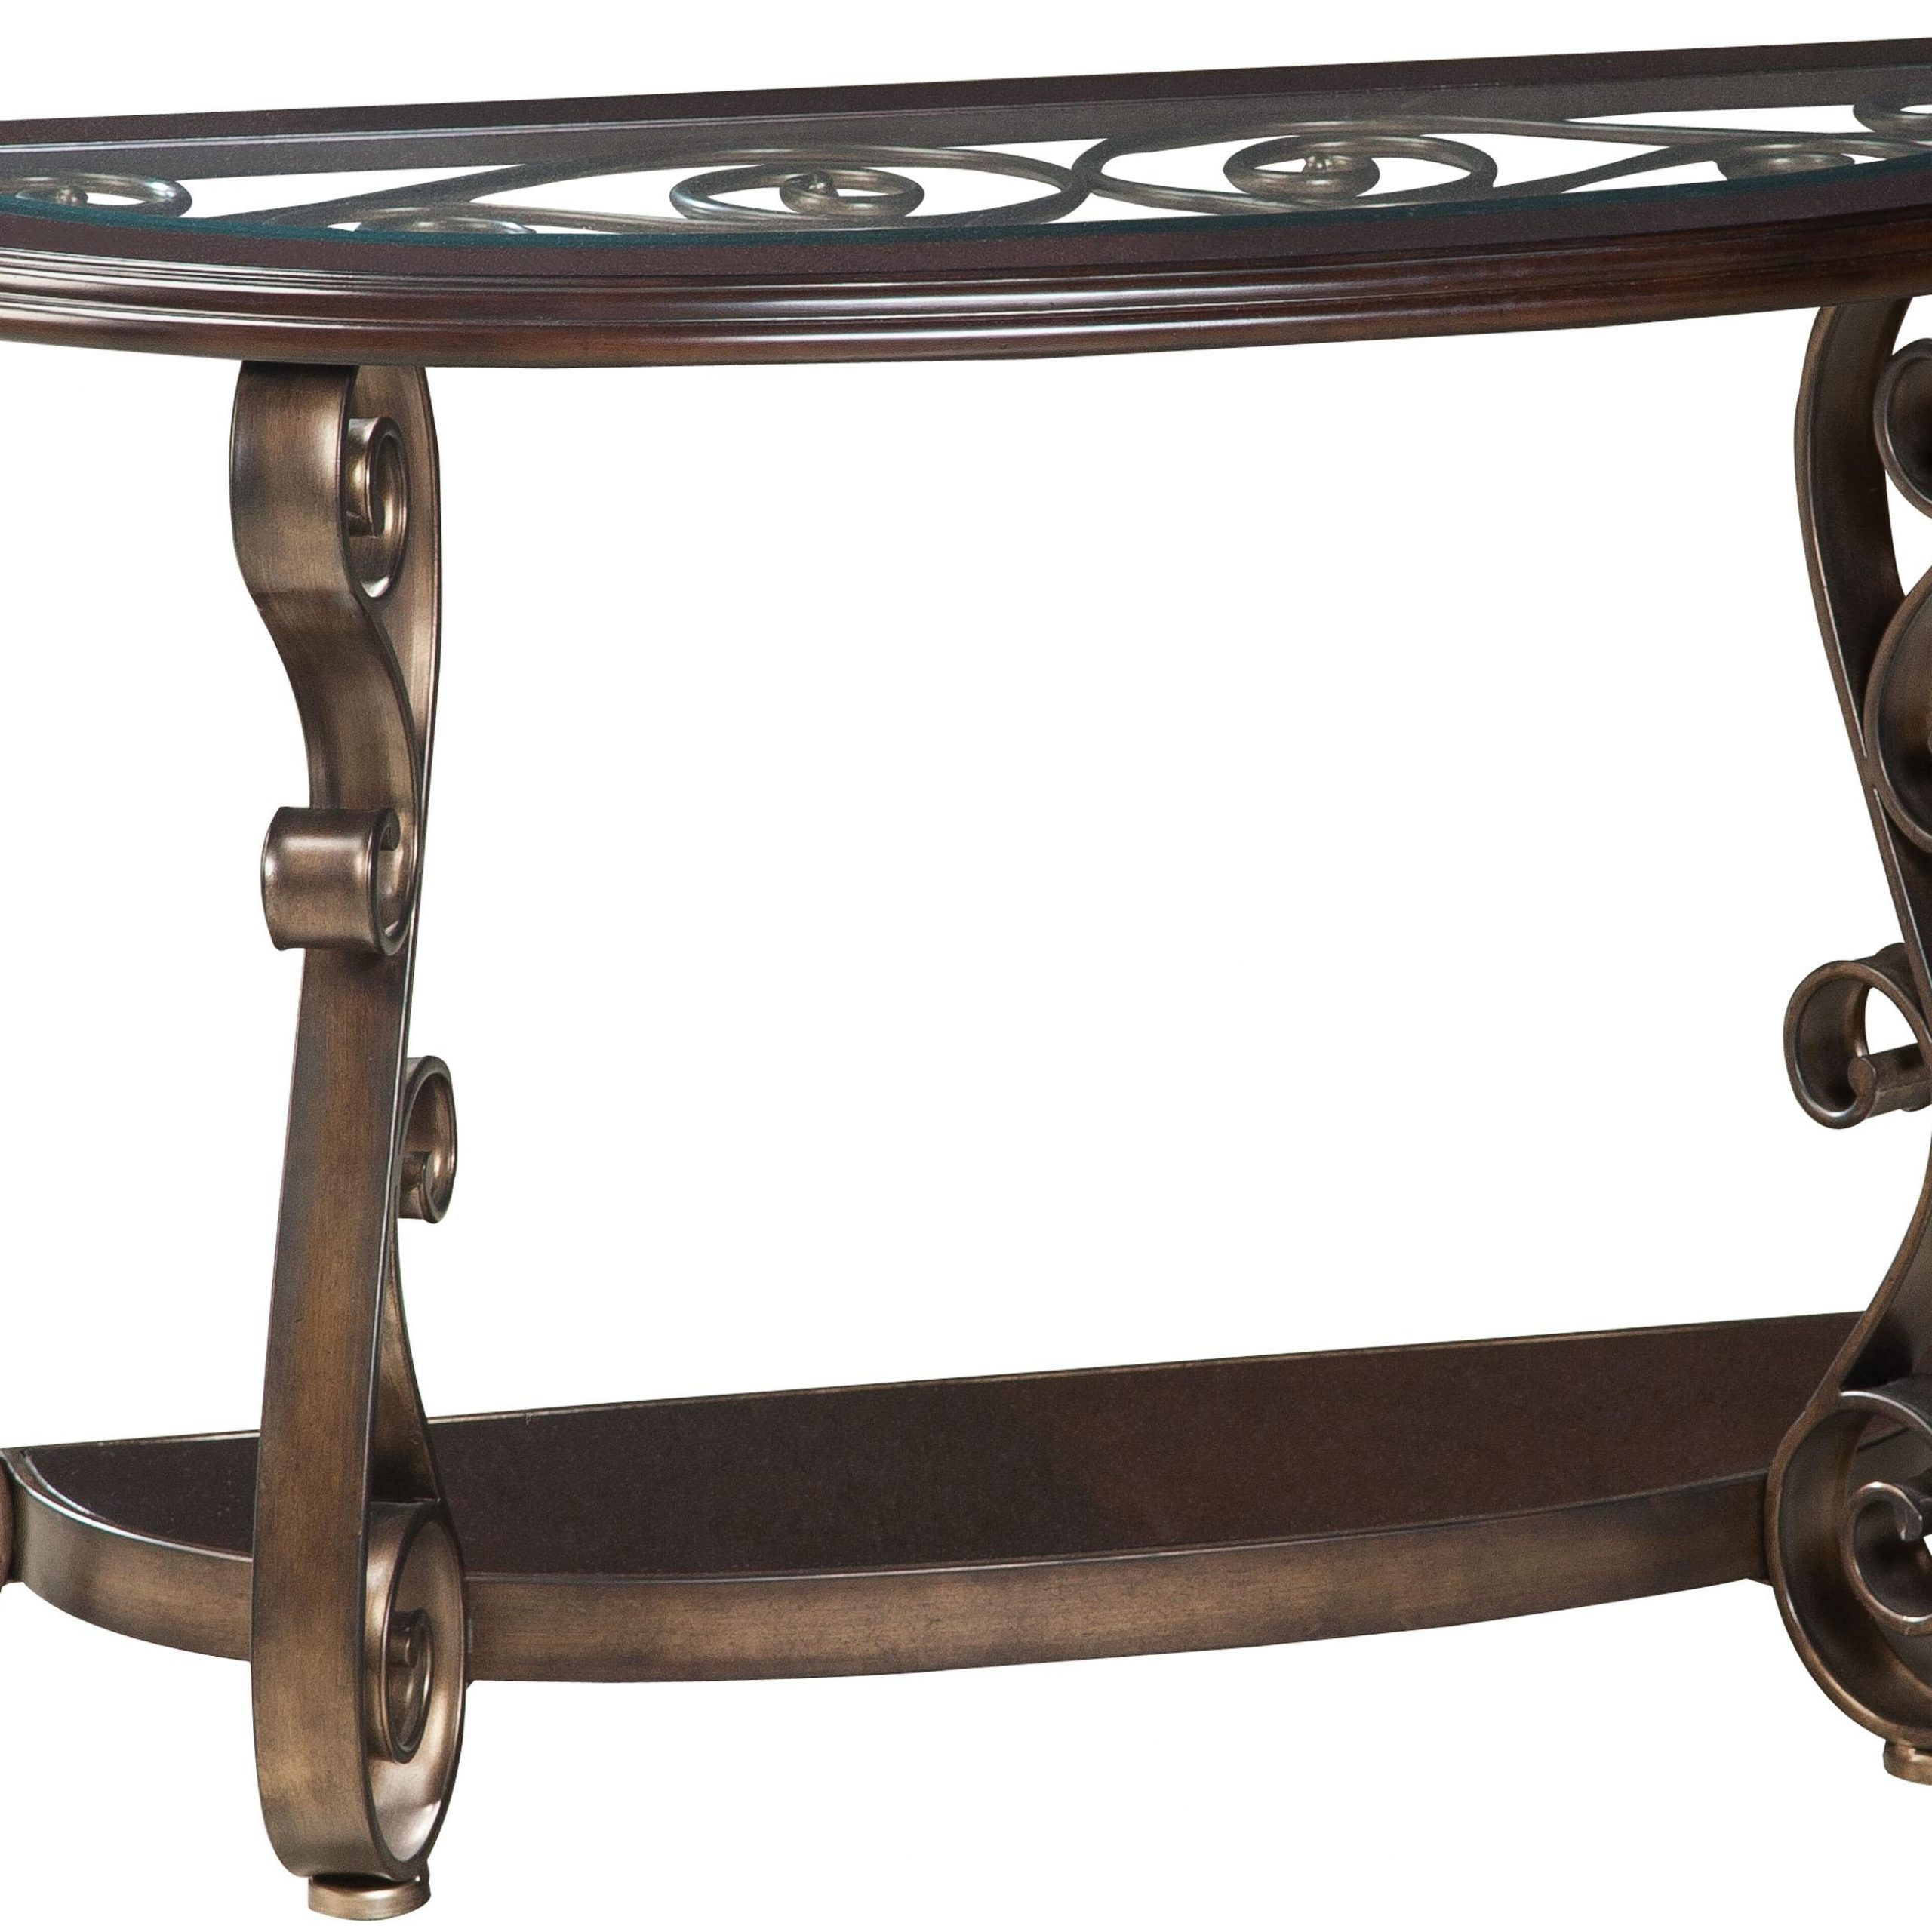 Old World Sofa Table With Glass Top And S Scroll Legs Within Metal Legs And Oak Top Round Console Tables (View 18 of 20)